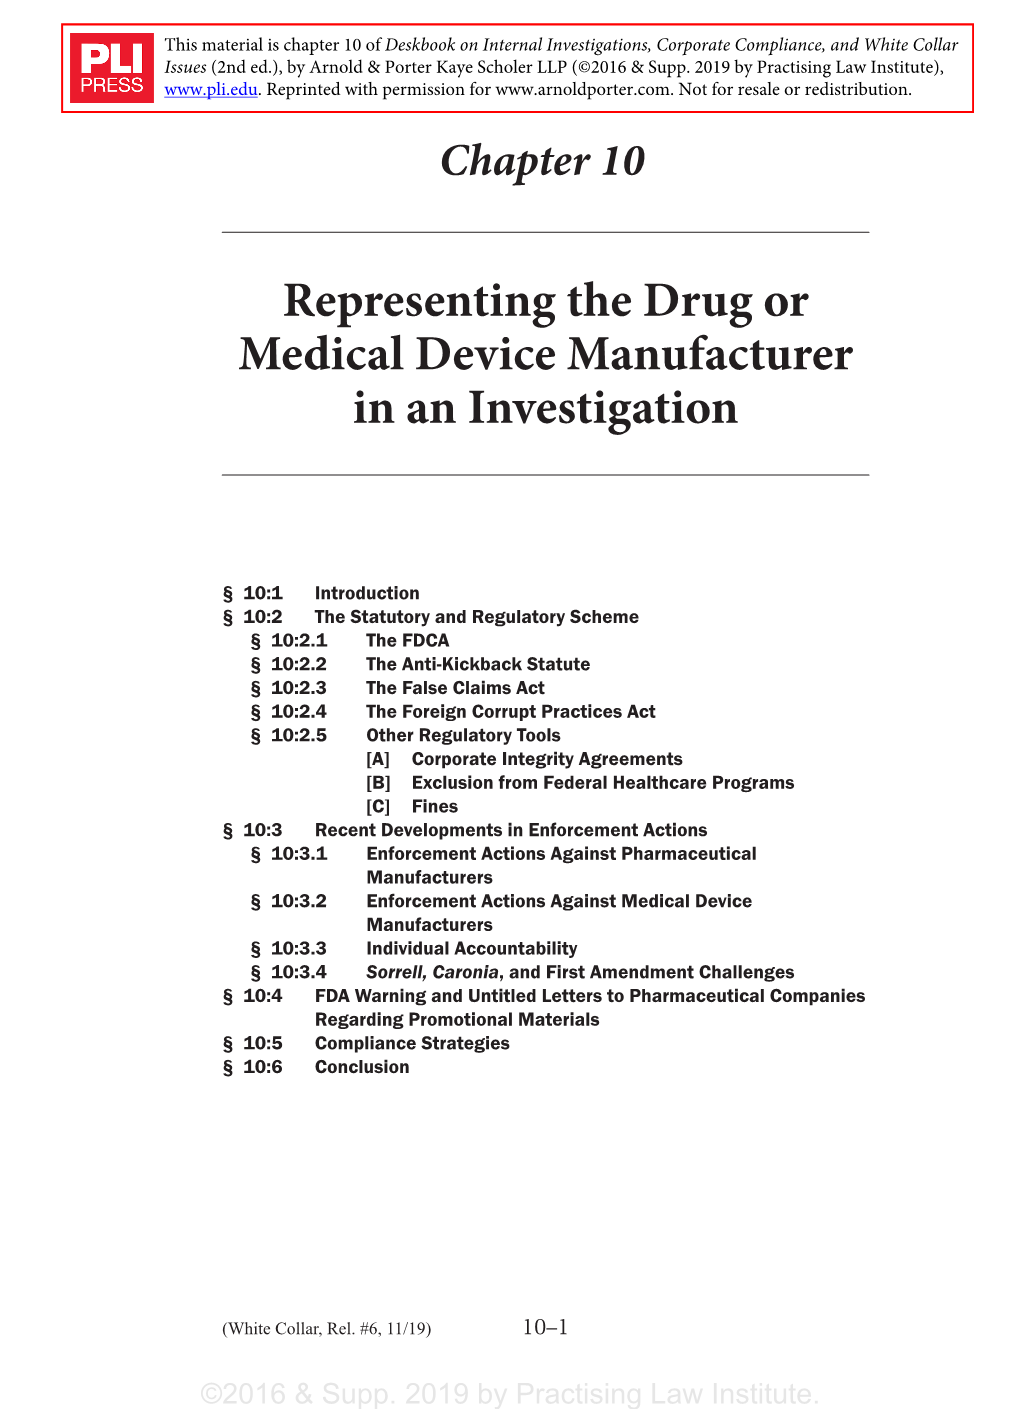 Representing the Drug Or Medical Device Manufacturer in an Investigation